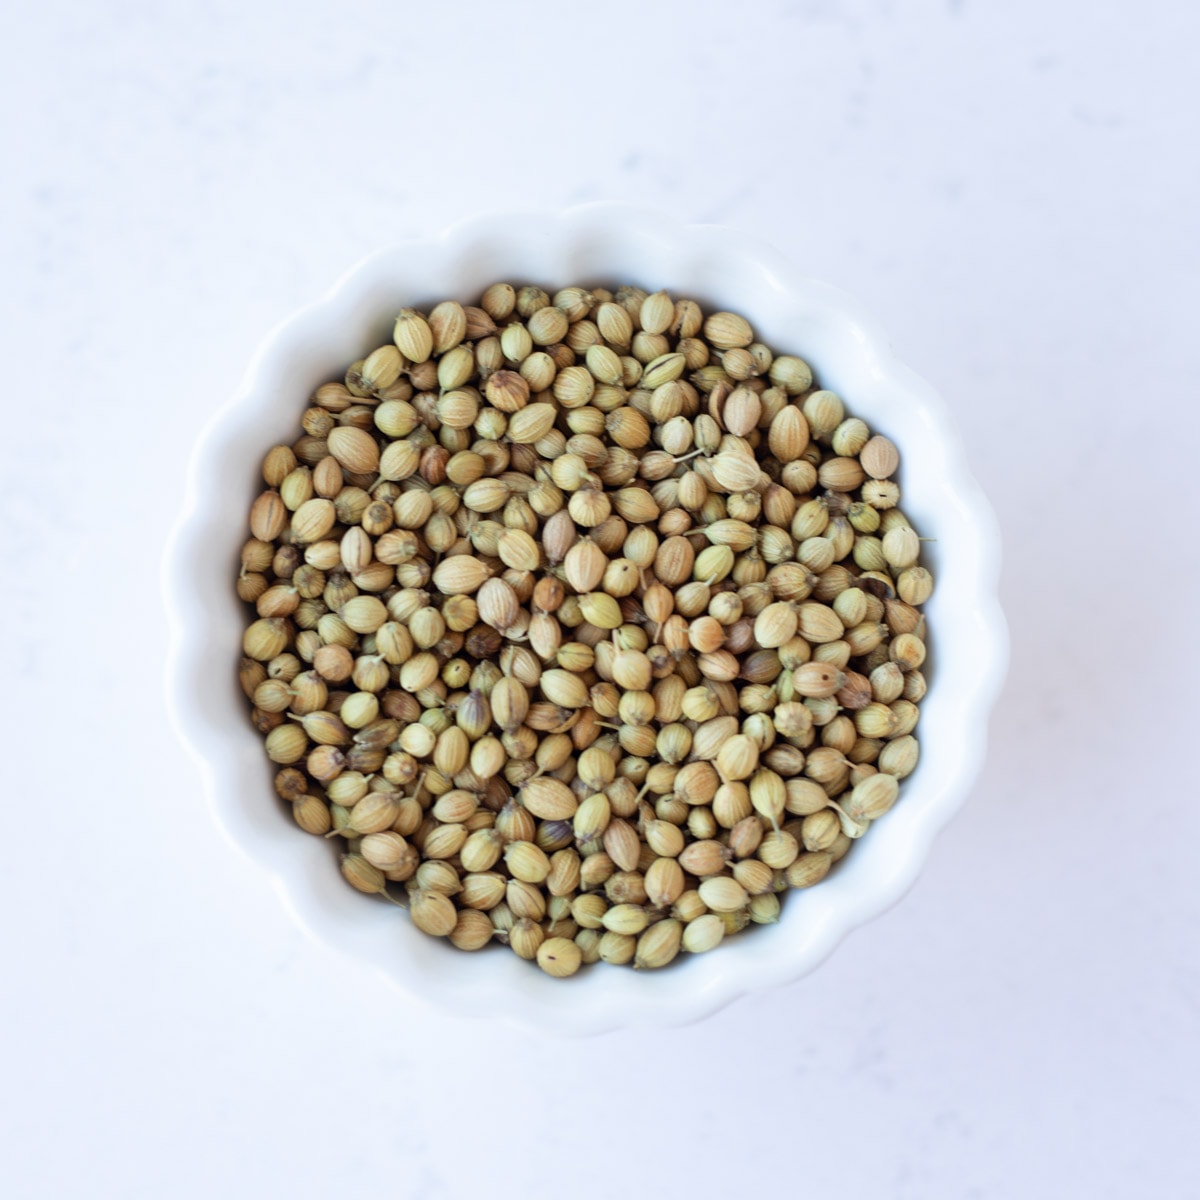 Coriander seeds in a small white bowl